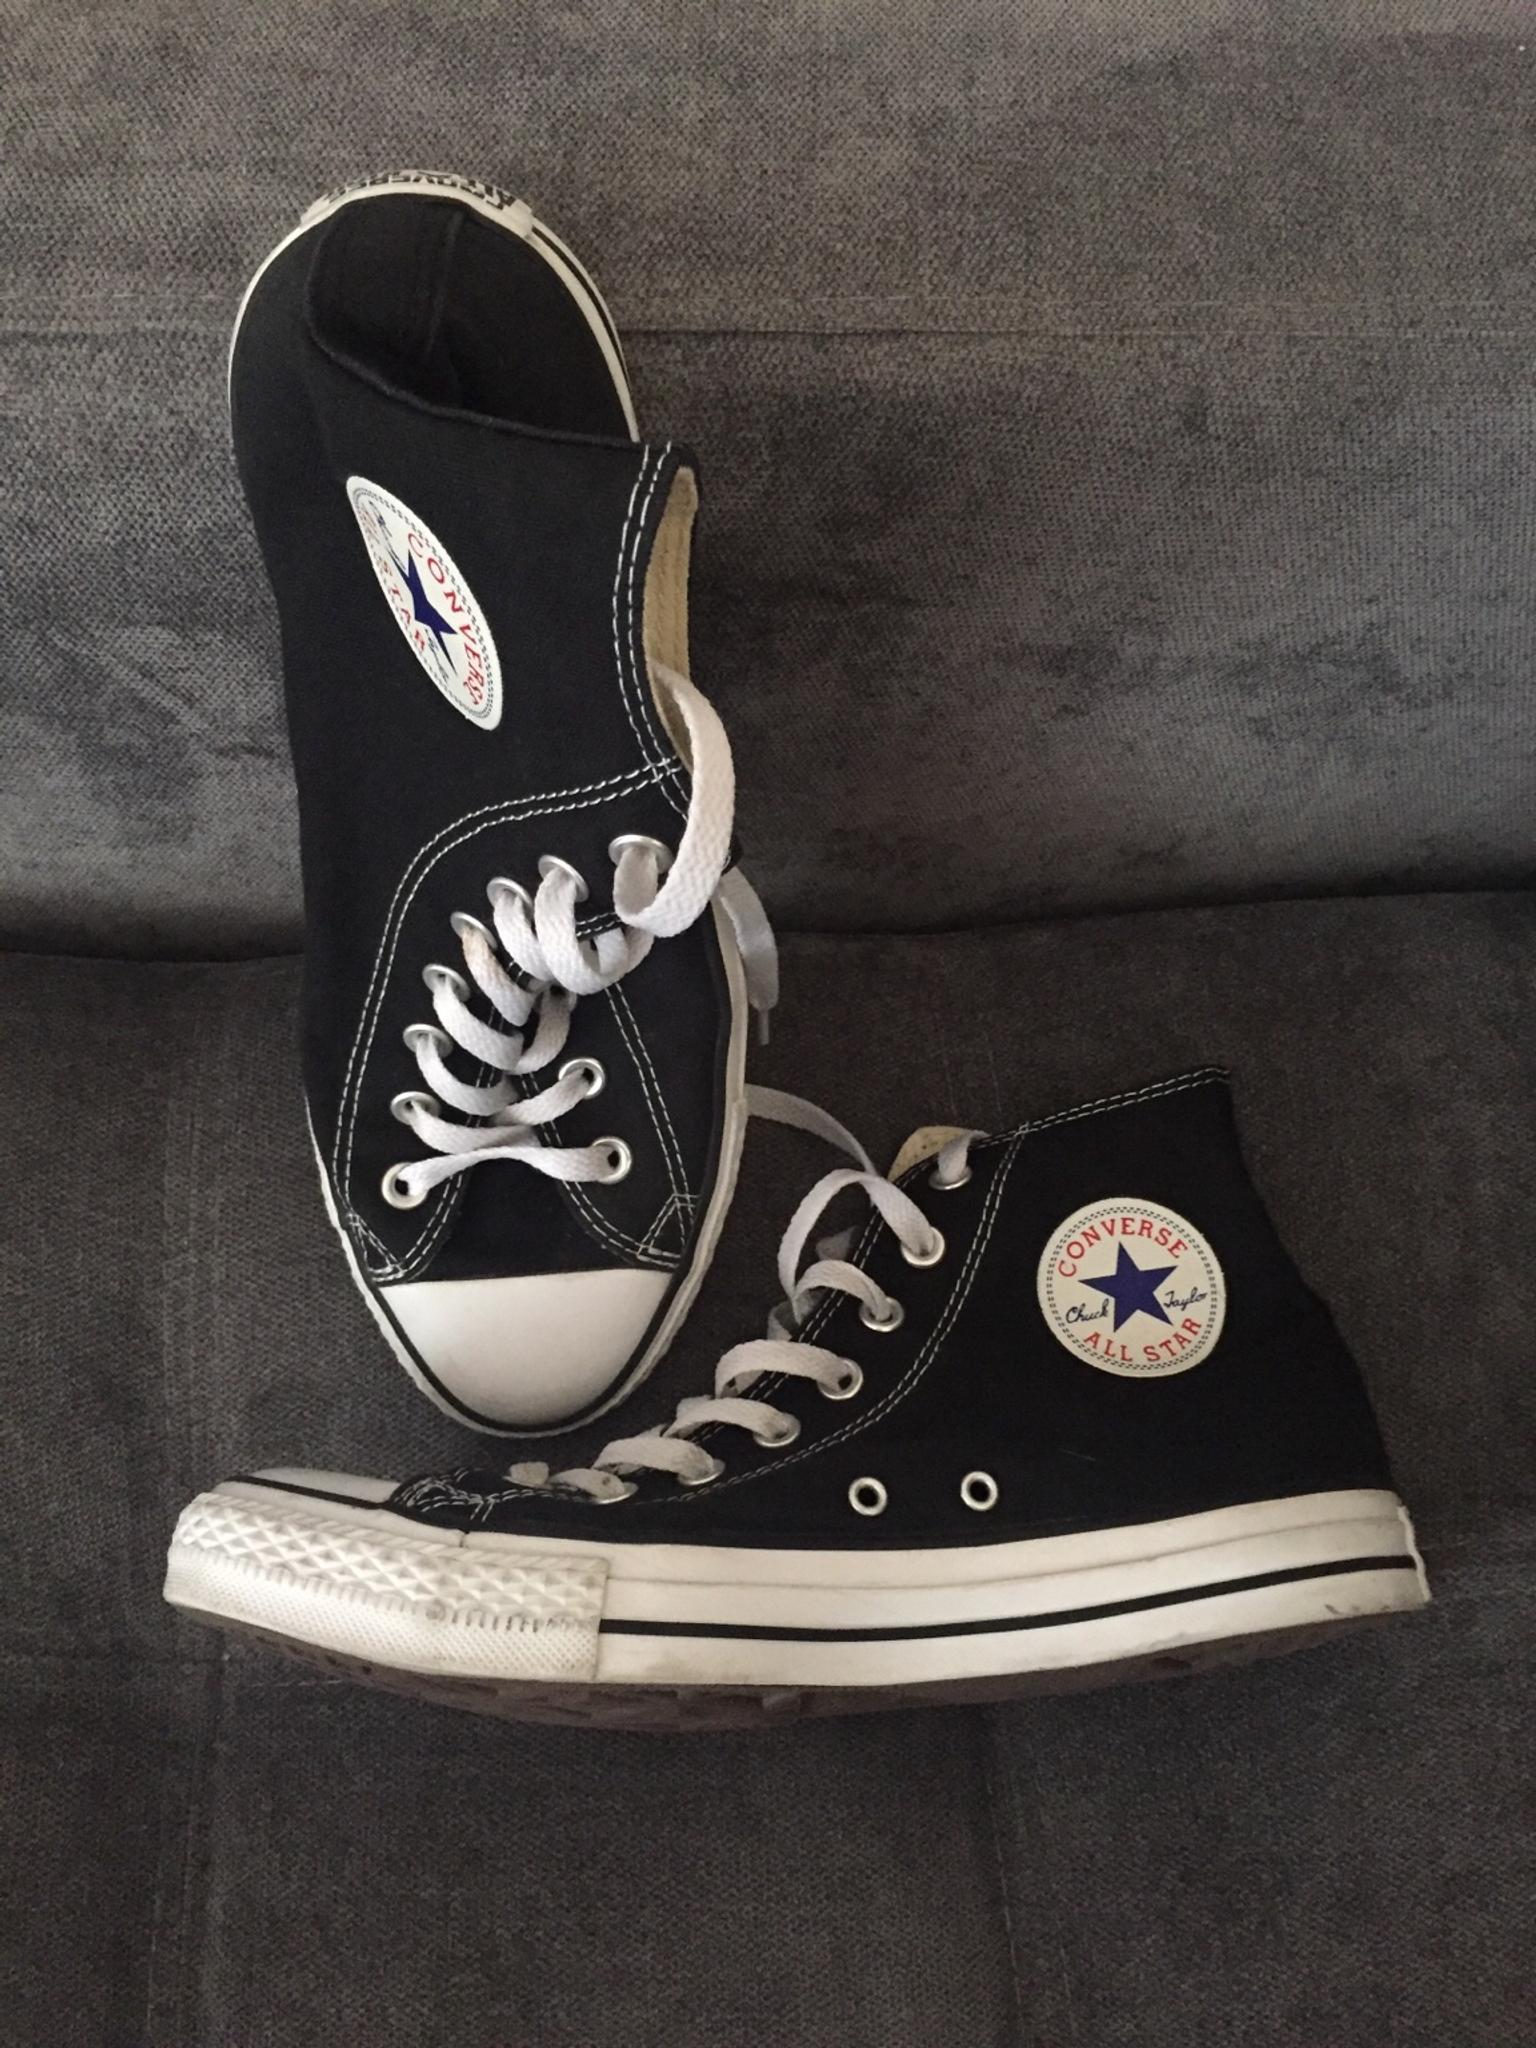 converse all star size 8.5